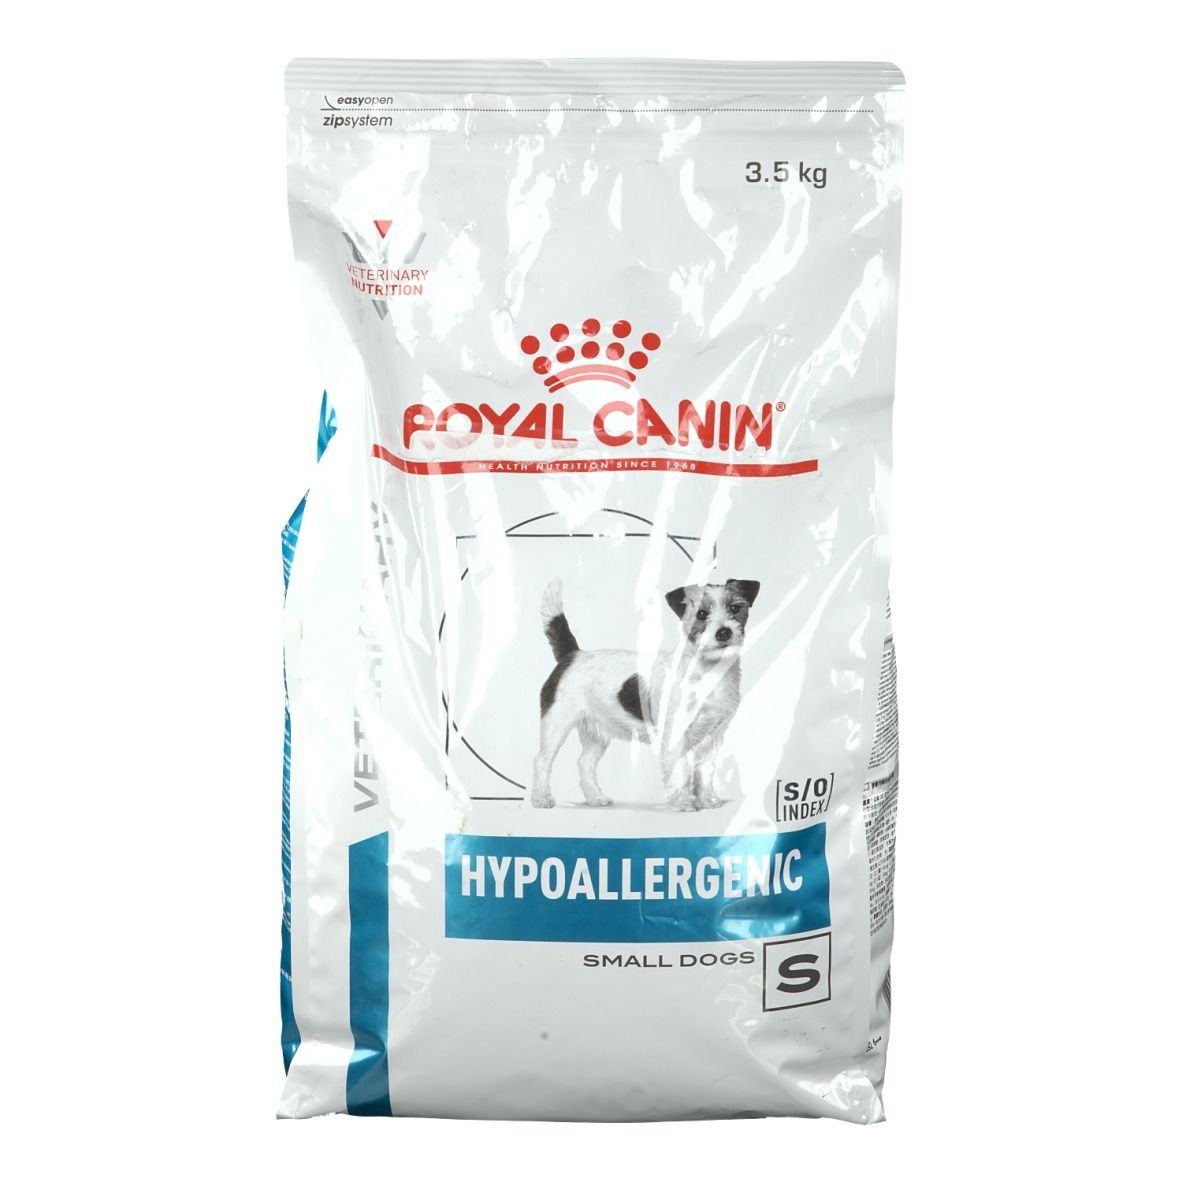 ROYAL CANIN® HYAPOALLERGENIC Aliments secs pour chiens < 10 kg